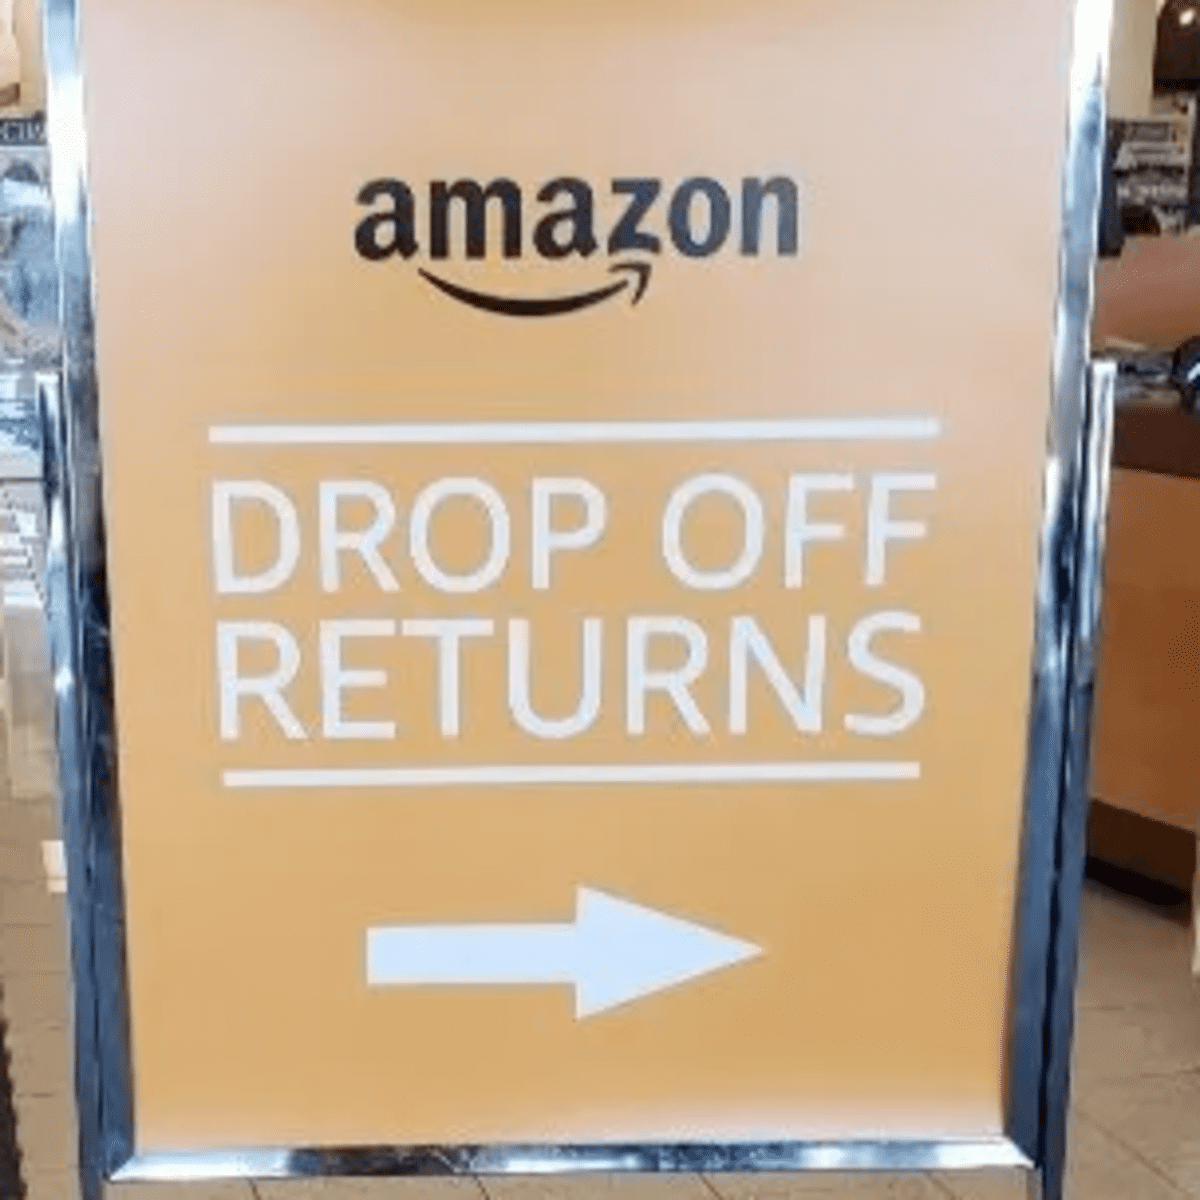 Amazon Ebook Return Policy 2022 (Return Limits, Refunds + More)